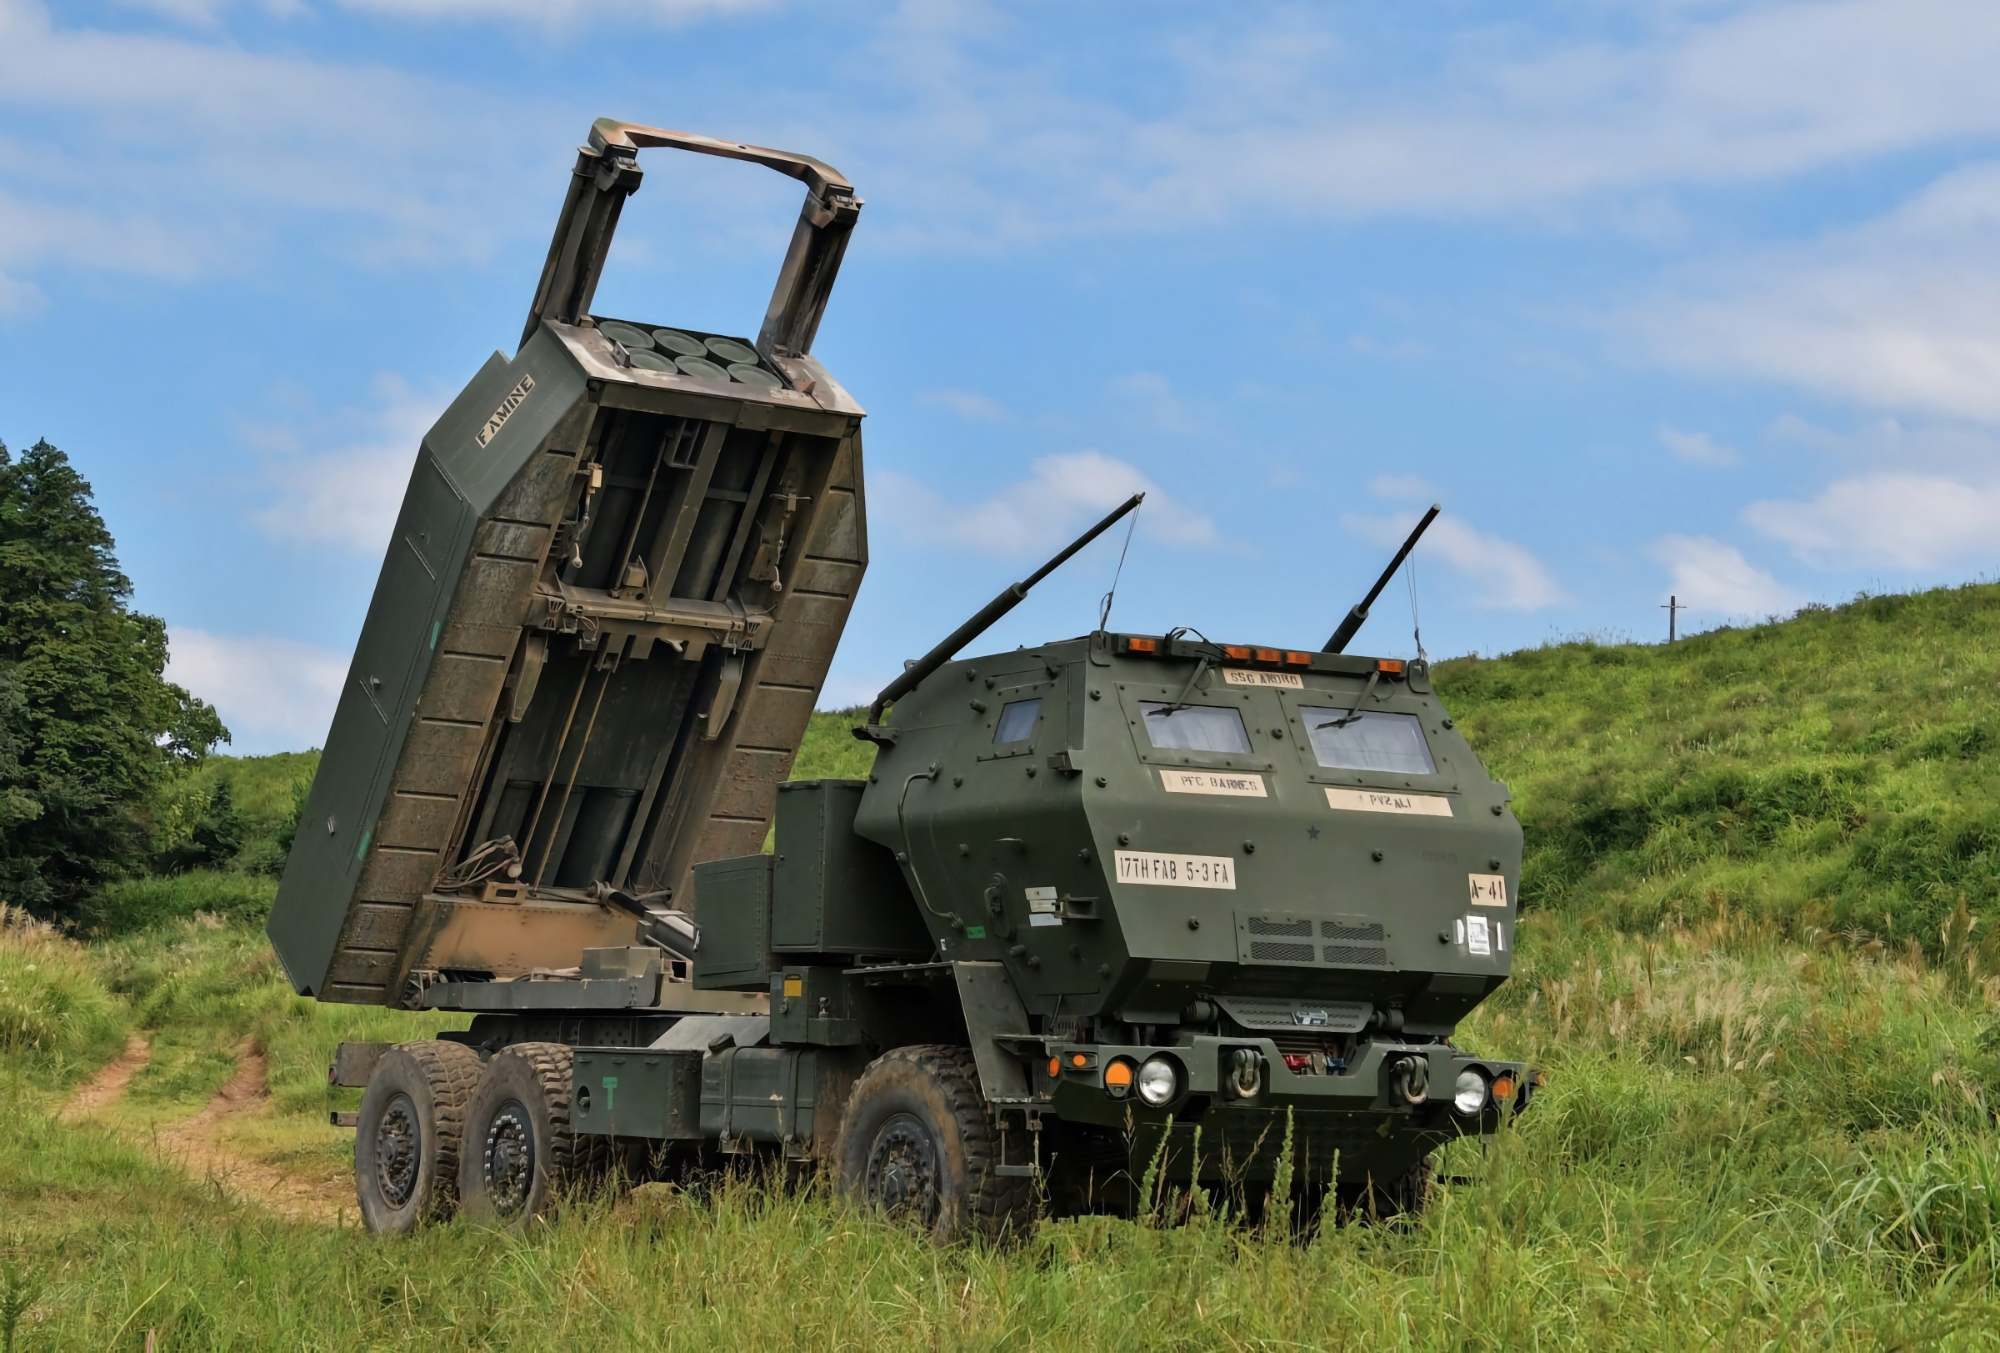 Germany to buy three HIMARS multiple rocket launchers from the US and transfer them to the Ukrainian Armed Forces